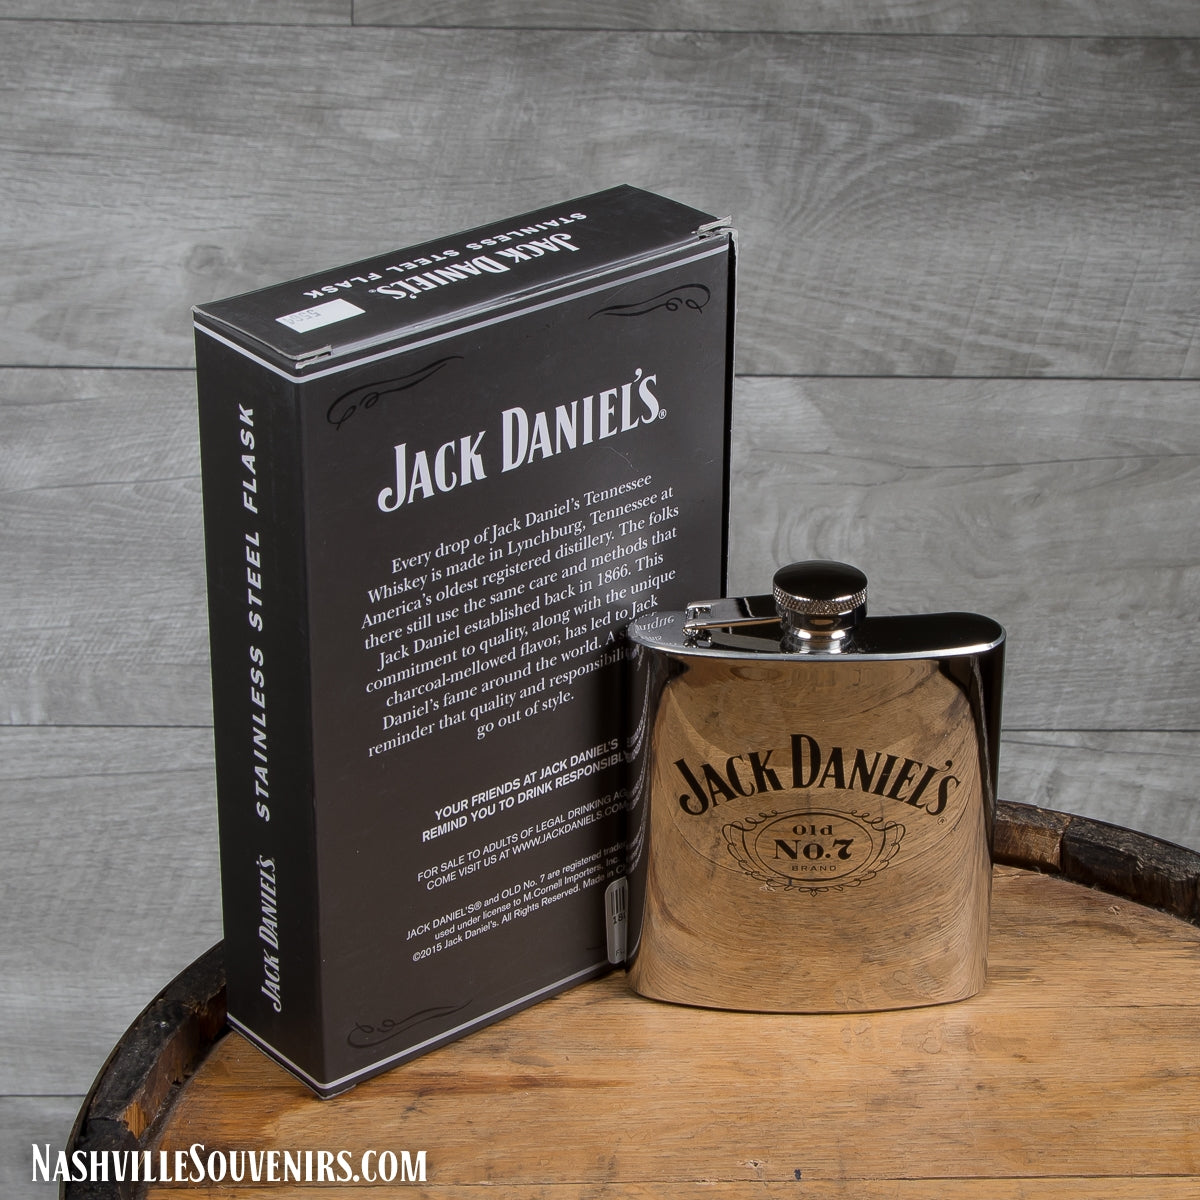 Officially licensed Jack Daniels Mirror Finish Screened Flask.  FREE SHIPPING on all US orders over $75!